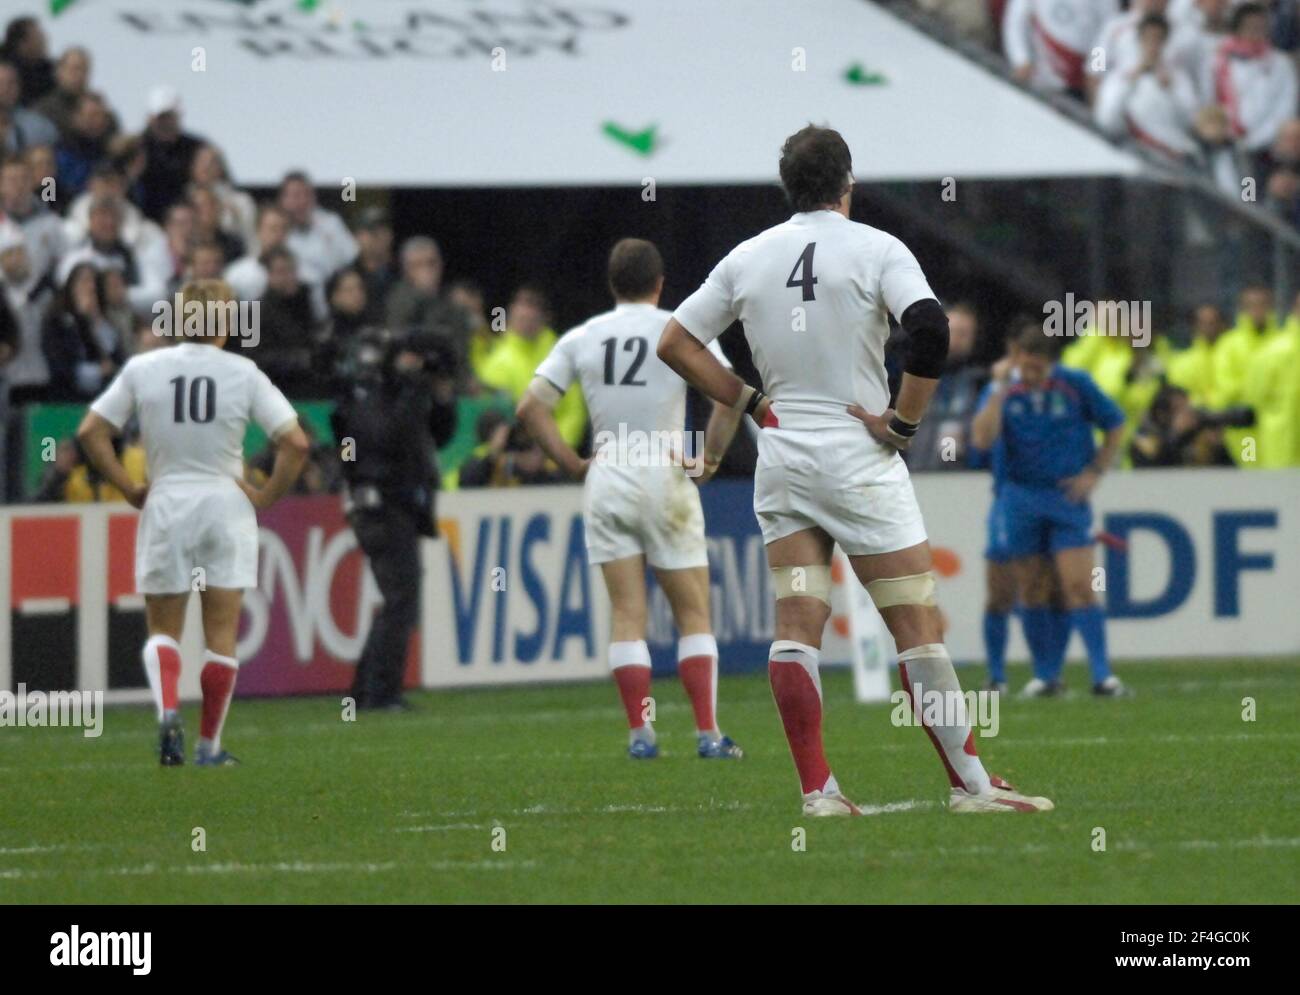 RUGBY WORLD CUP FINAL ENGLAND V SOUTH AFRICA IN THE STADE DE FRANCE PARIS. 20/10/2007. WAITING FOR THE TRY. PICTURE DAVID ASHDOWN Stock Photo